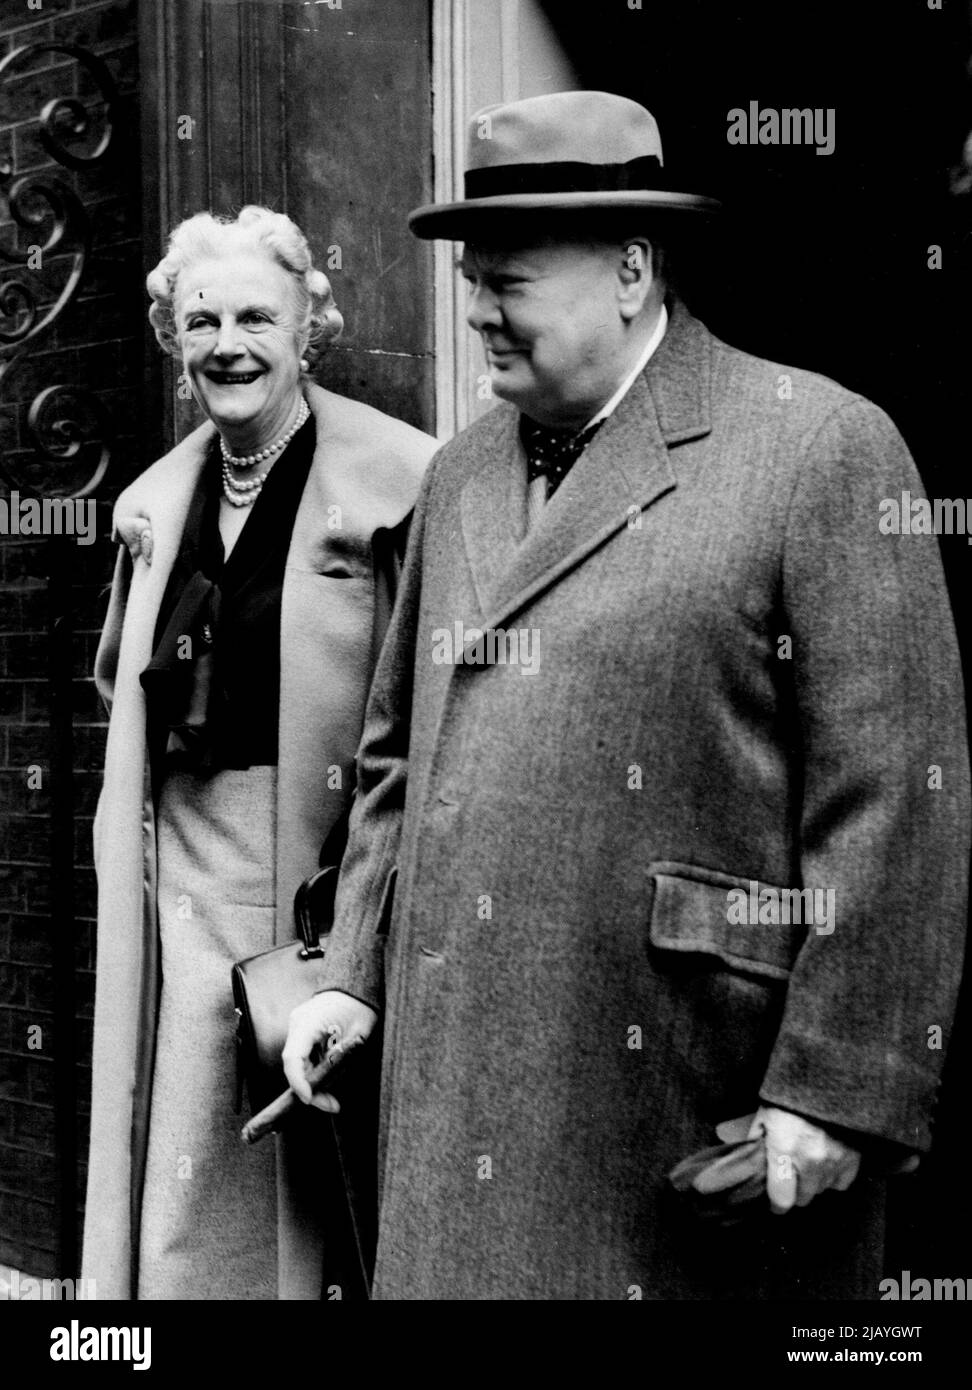 Premier Leaves For Holiday: Leaving No. 10, Downing Street this morning (Tuesday) for London airport are Mr. and Mrs. Winston Churchill, who are to spend a short holiday at Lord Beaverbrock's villa in the South of France. September 09, 1952. (Photo by Reuterphoto). Stock Photo